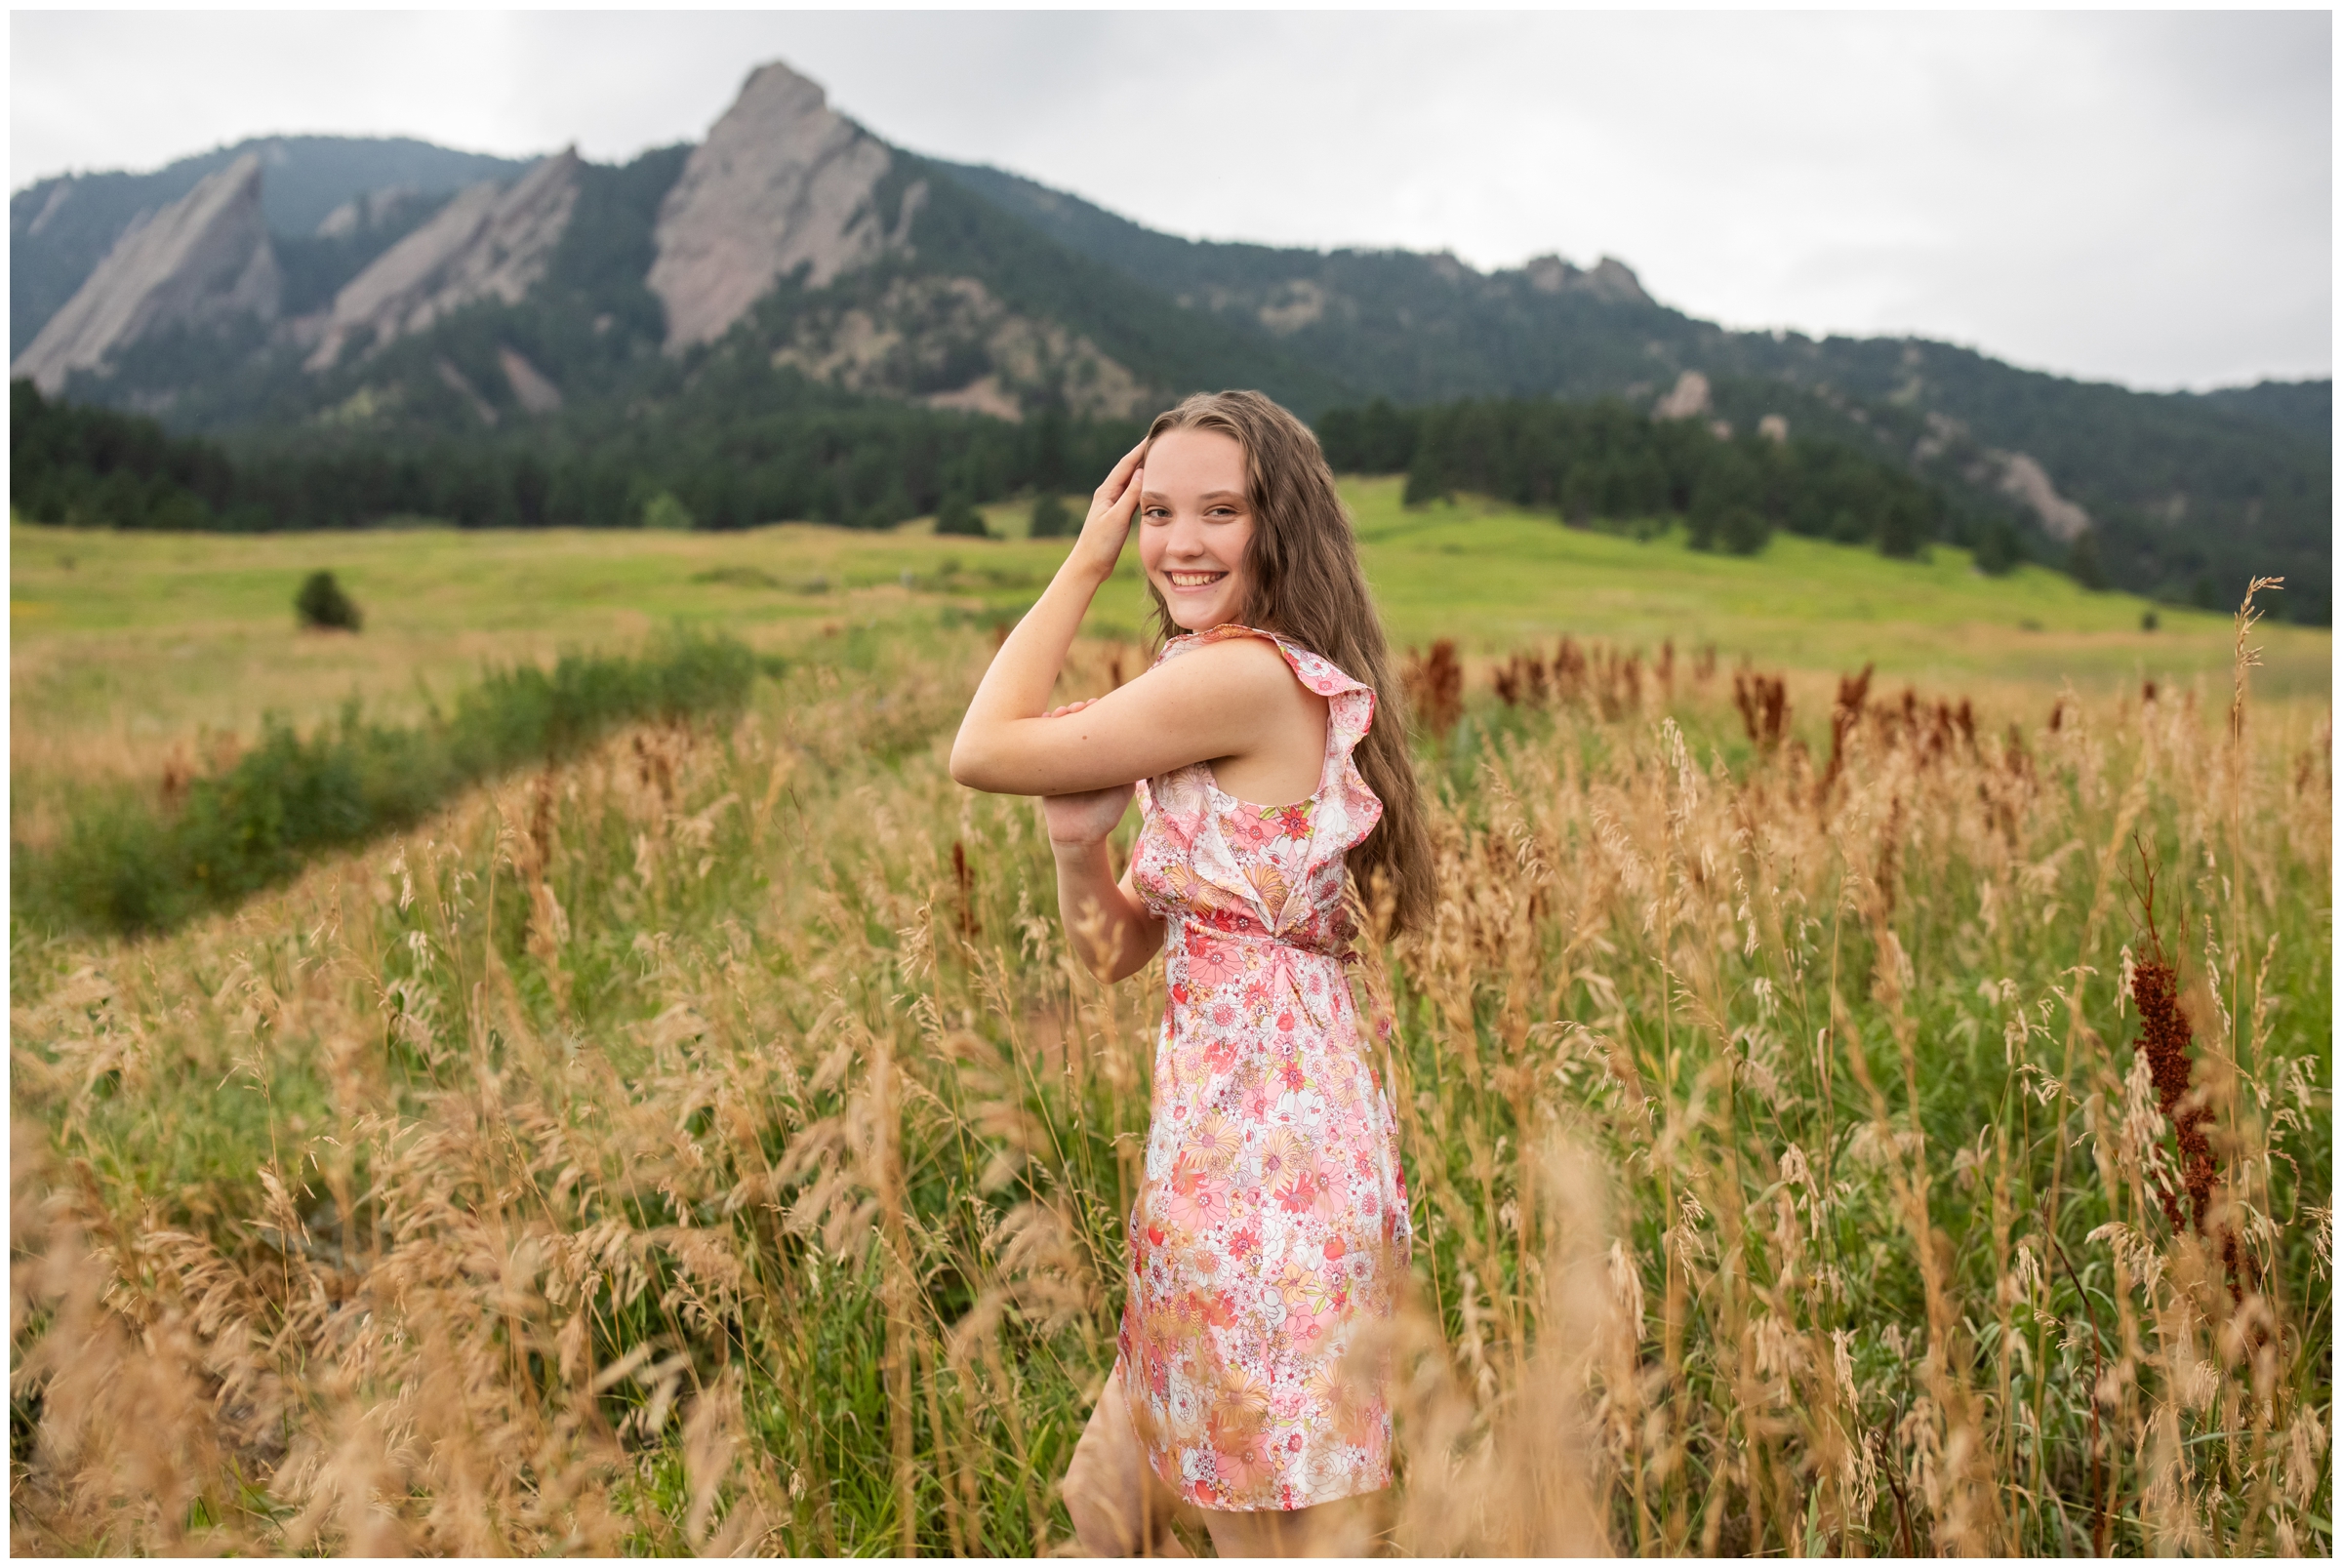 teen posing in field of long grasses during flatirons mountains photography session at Chautauqua in boulder Colorado 